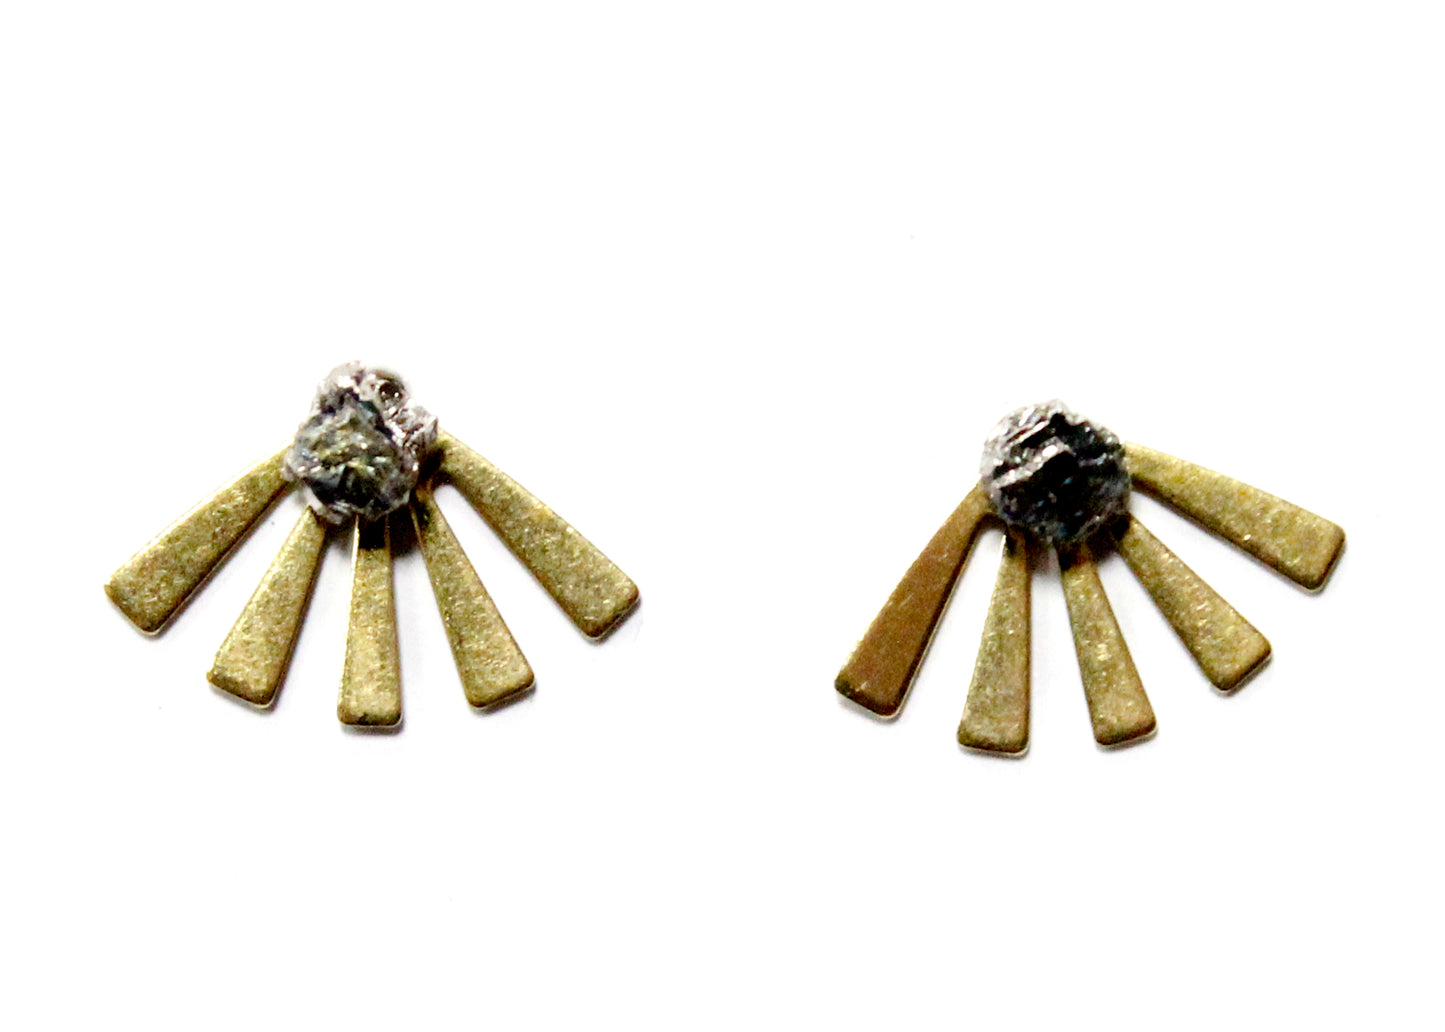 Eyelash Layered Stud Earrings in Brass with Bismuth